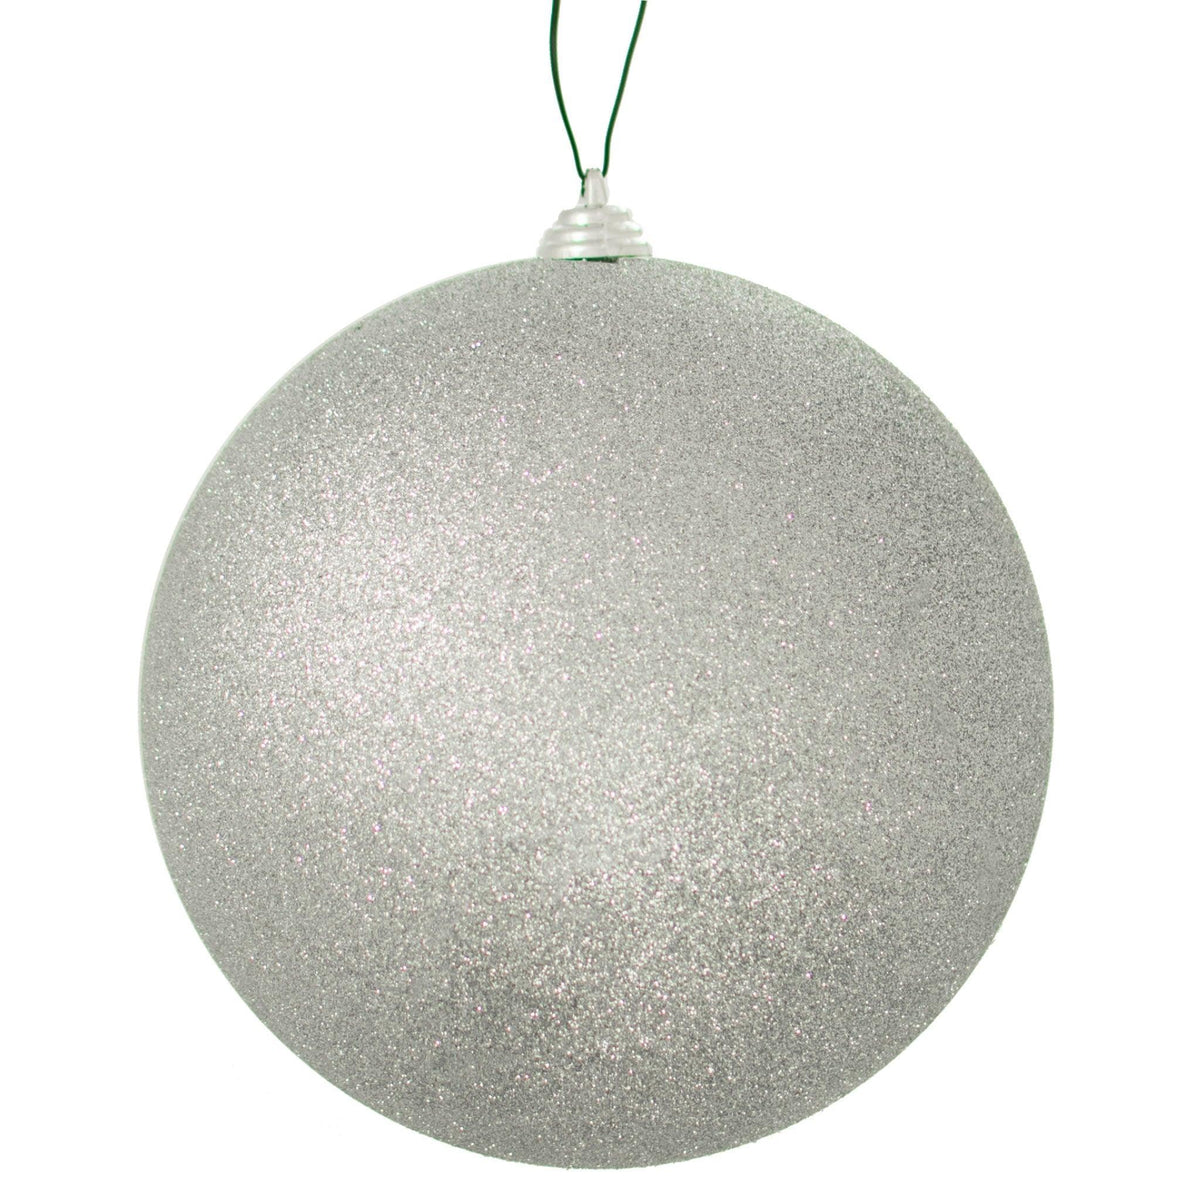 Lee Display offers brand new Shiny Glitter Silver Plastic Ball Ornaments at wholesale prices for affordable Christmas Tree Hanging and Holiday Decorating on sale at leedisplay.com